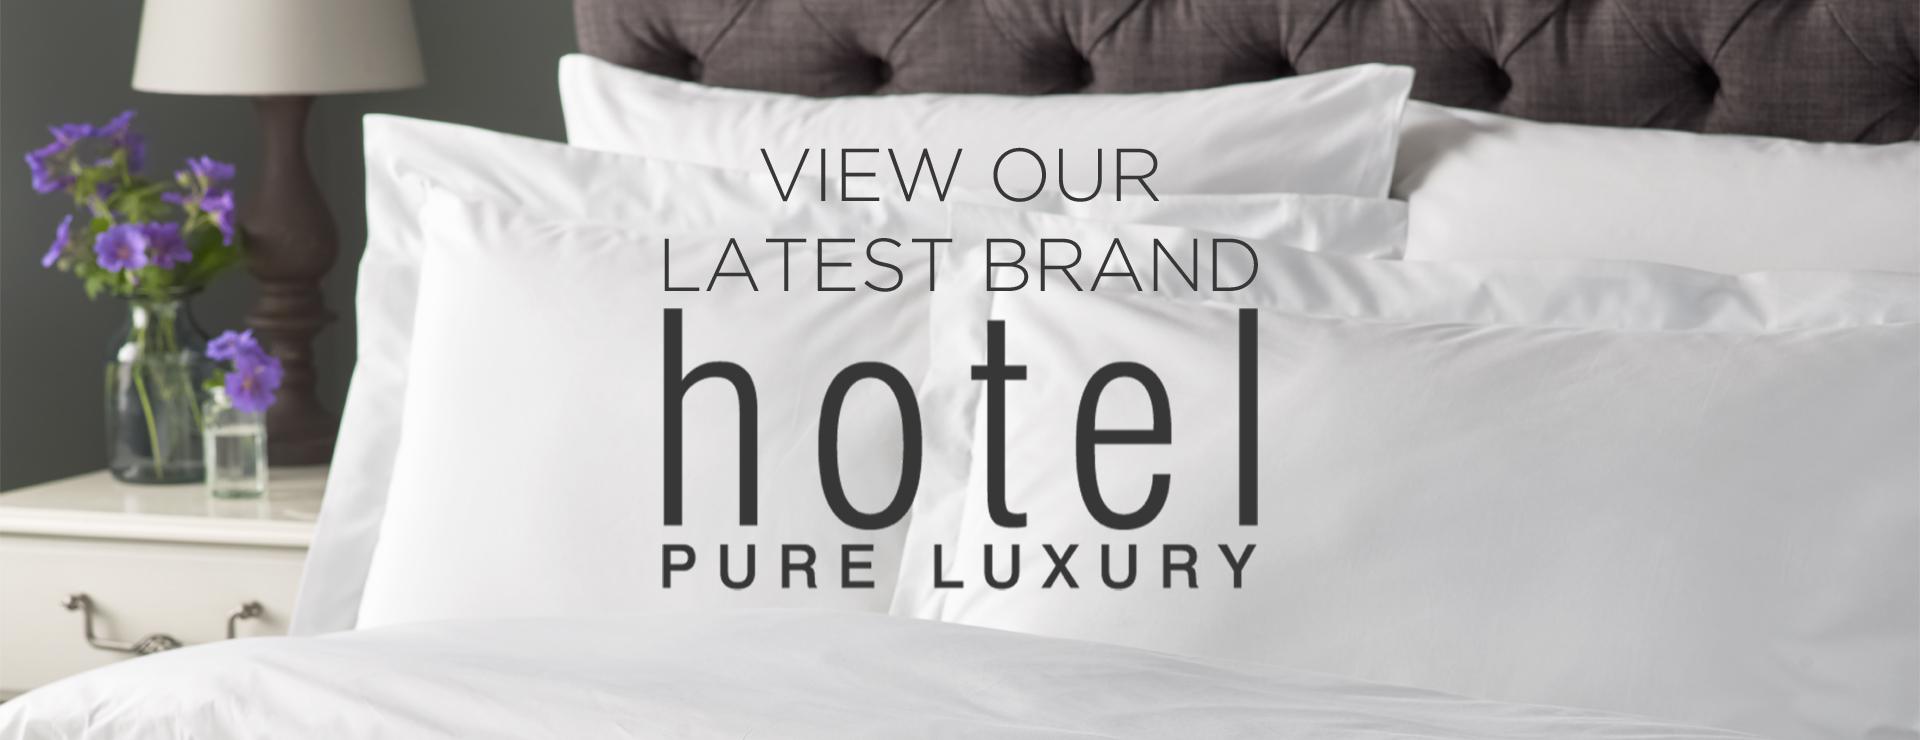 Wholesale Suppliers Of Hotel Quality Bedding Towels Restaurant